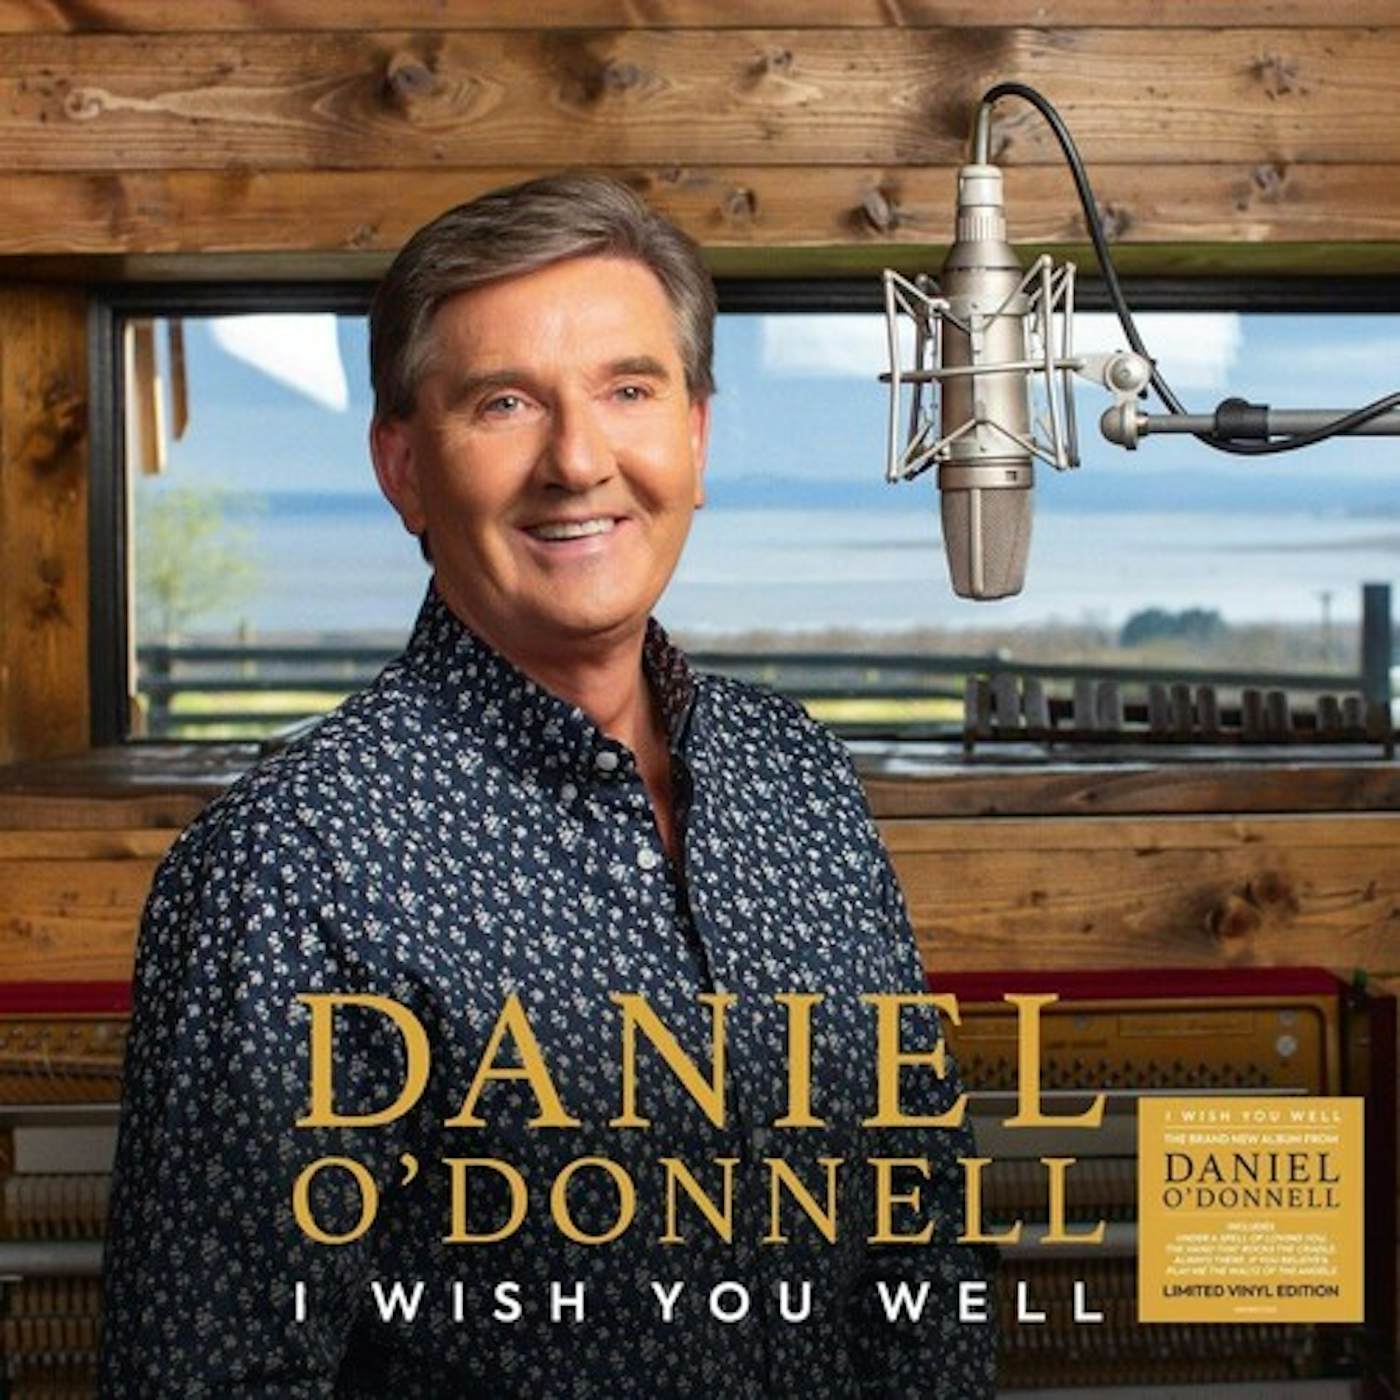 Daniel O'Donnell I Wish You Well Vinyl Record